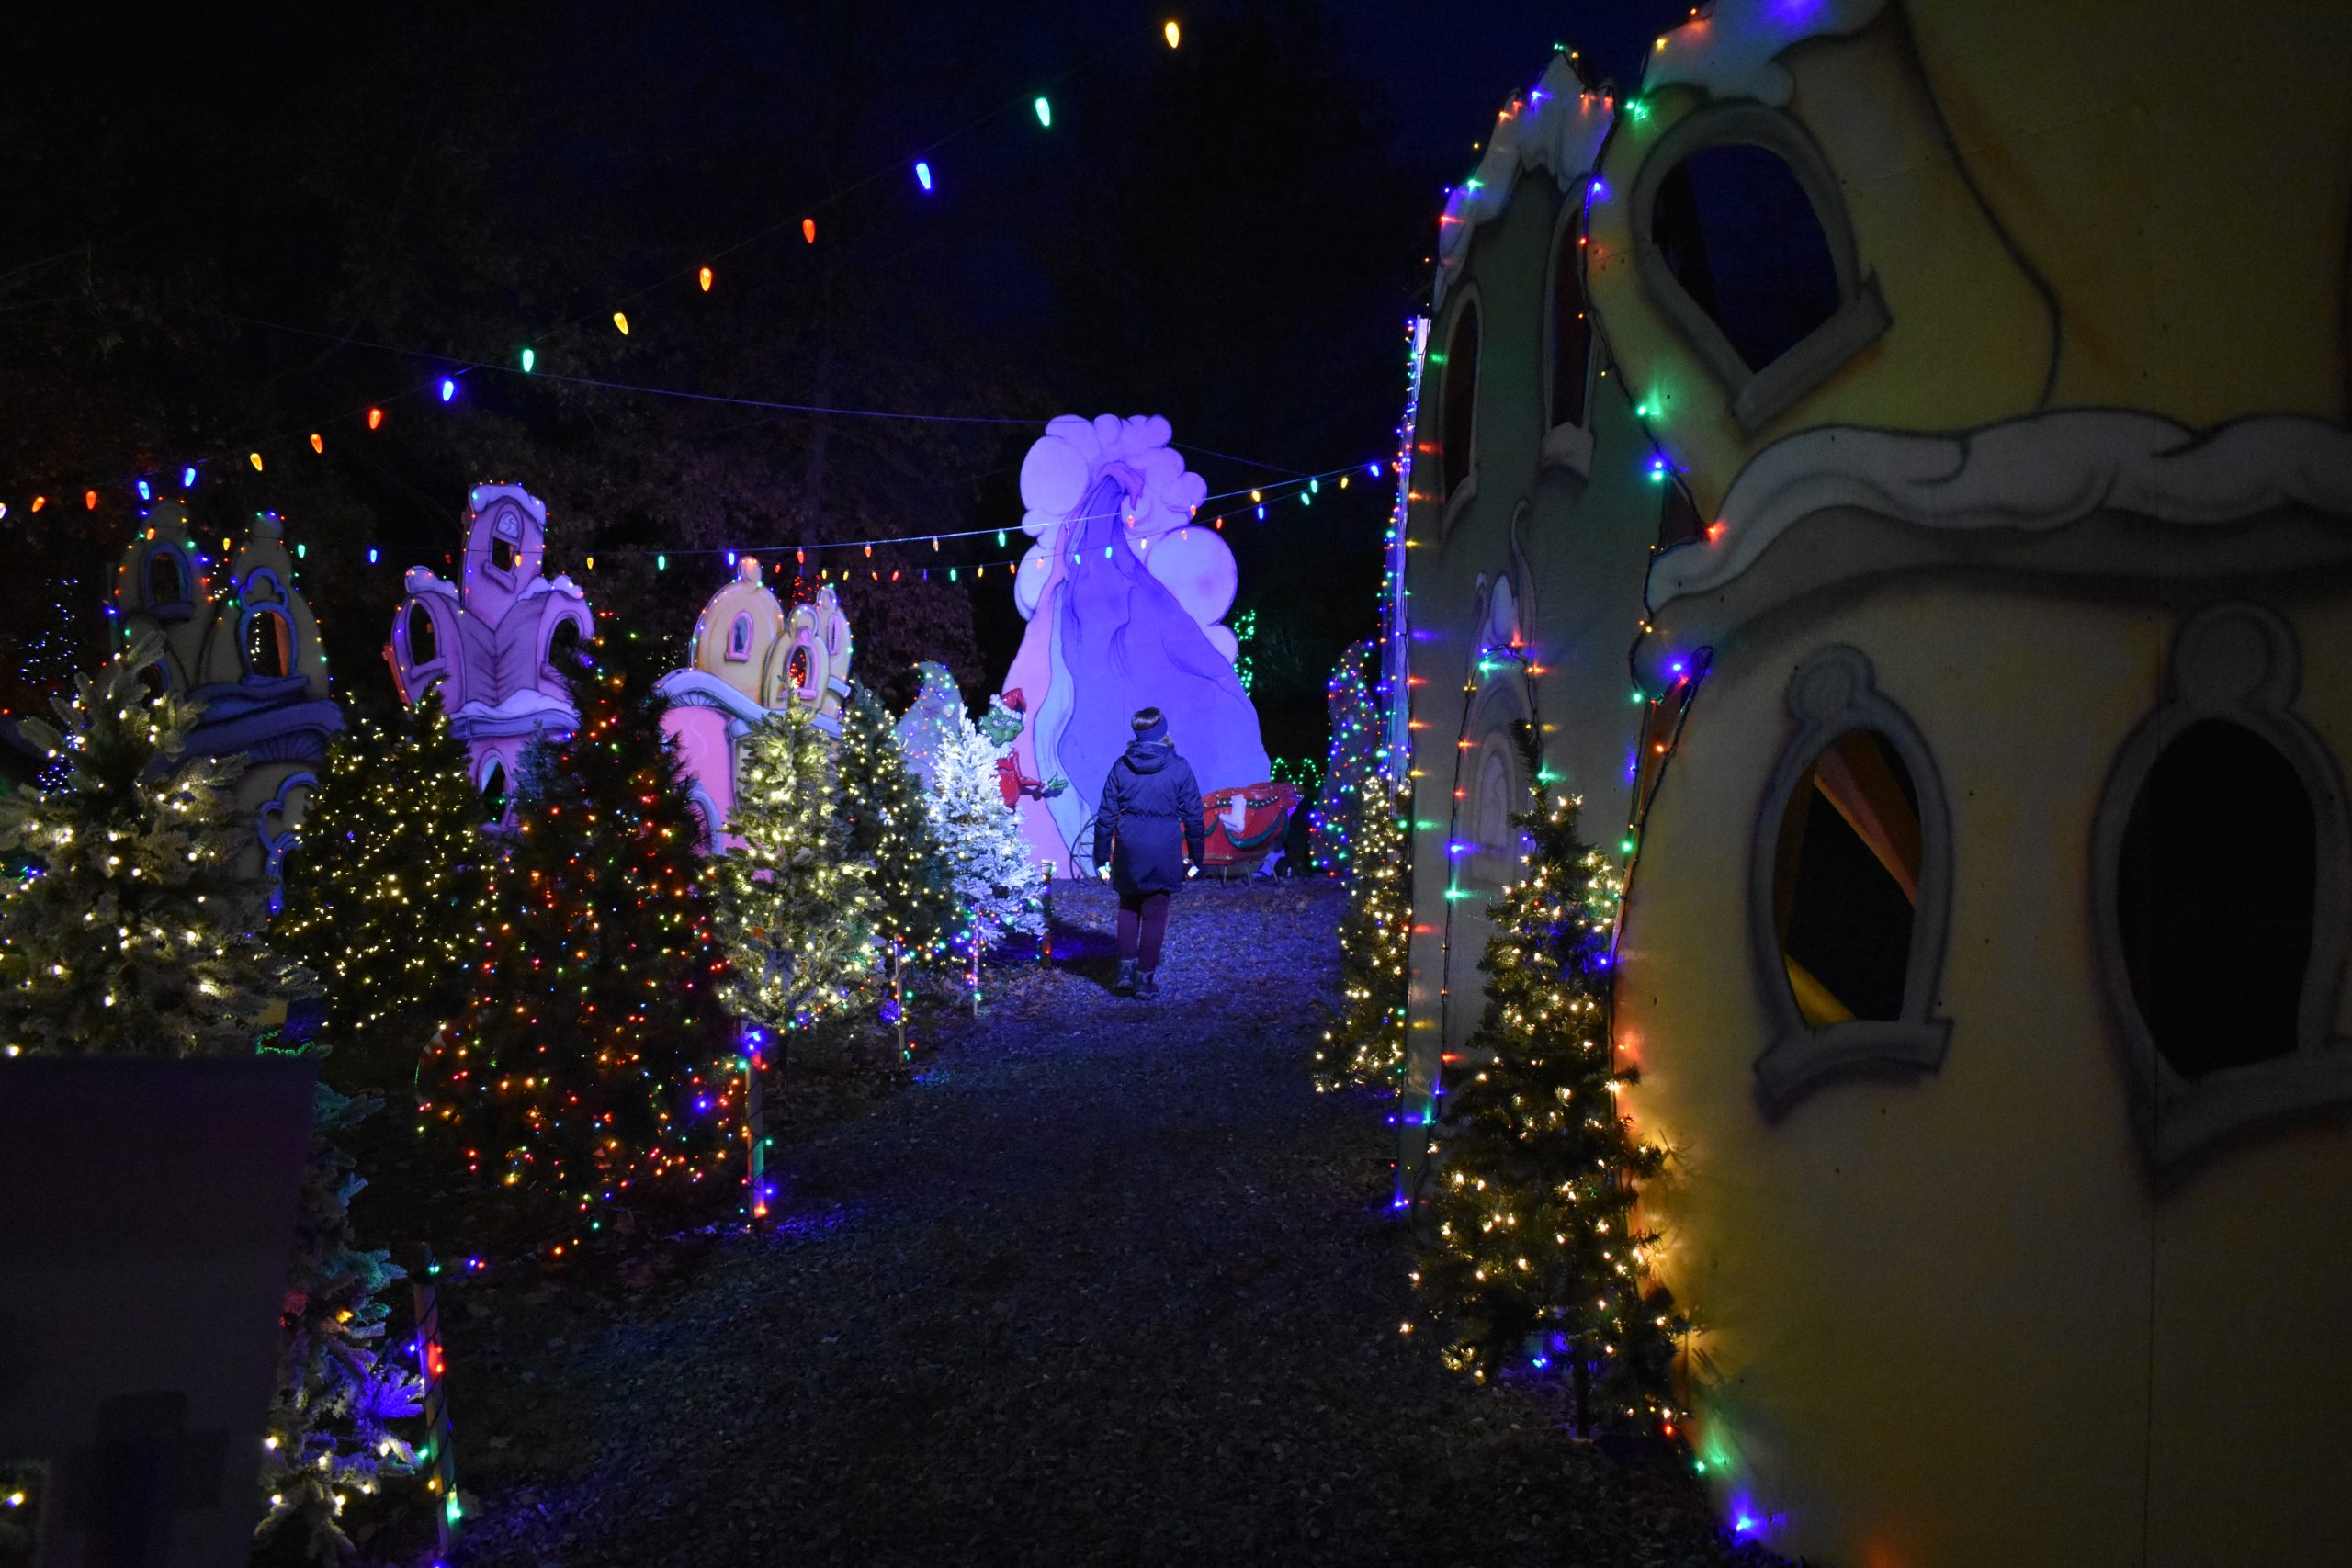 The Whoville area of Winter Light Spectacular